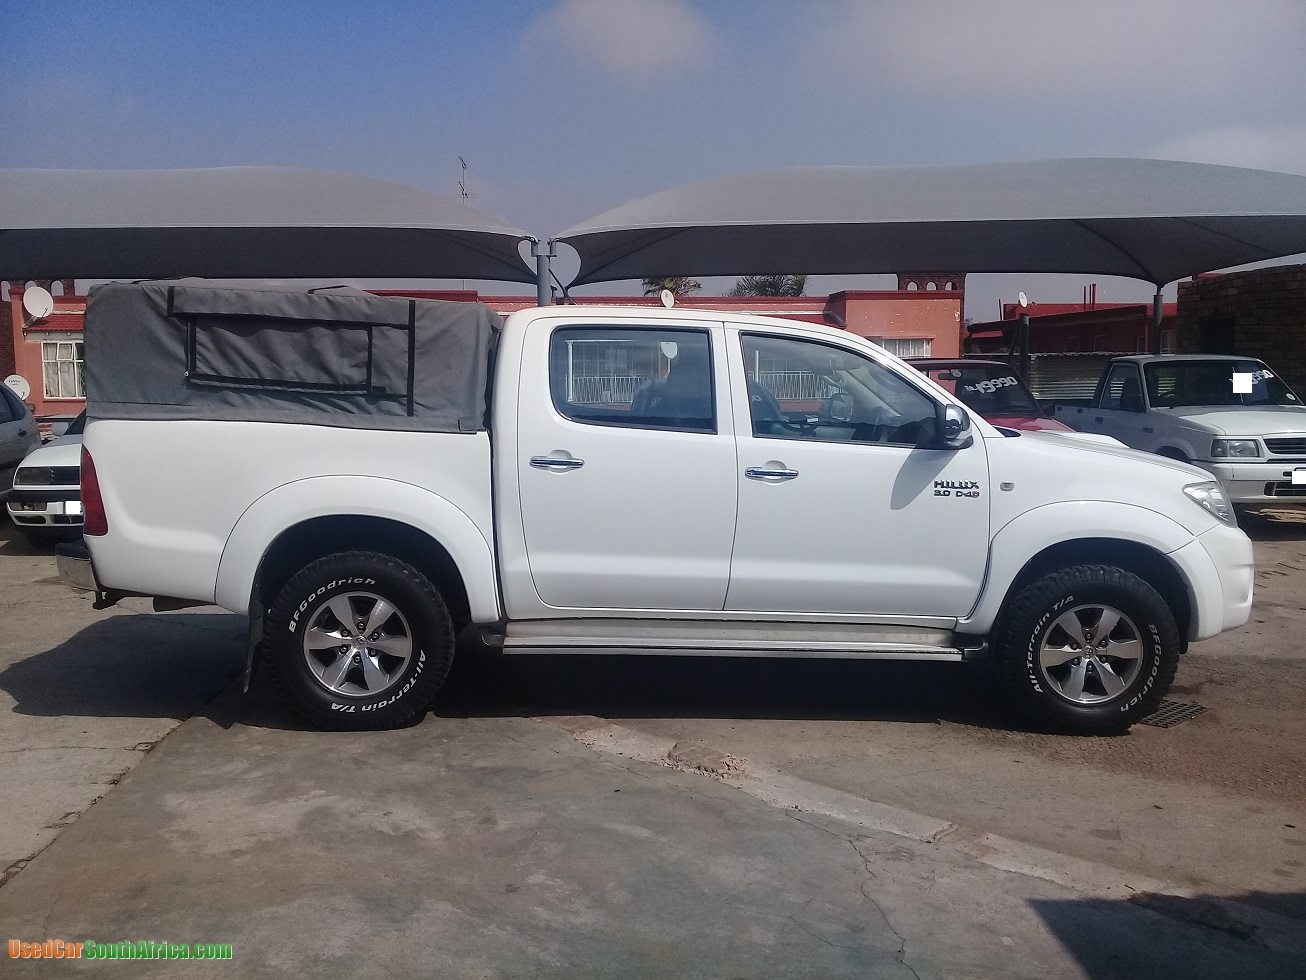 2009 Toyota Hilux used car for sale in Roodepoort Gauteng South Africa - www.semadata.org